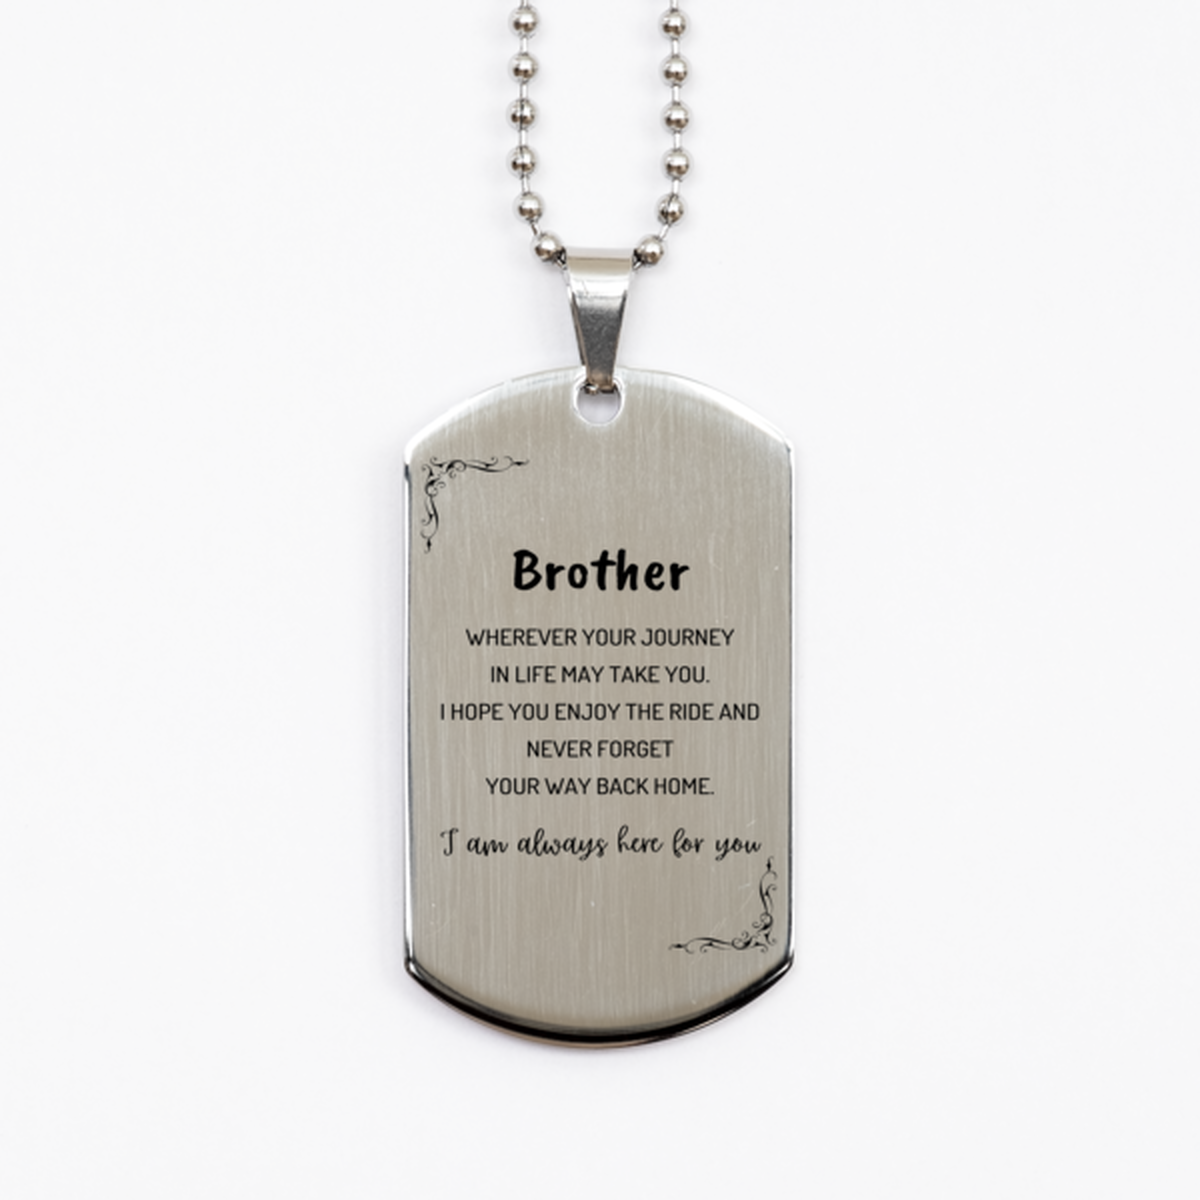 Brother wherever your journey in life may take you, I am always here for you Brother Silver Dog Tag, Awesome Christmas Gifts For Brother, Brother Birthday Gifts for Men Women Family Loved One